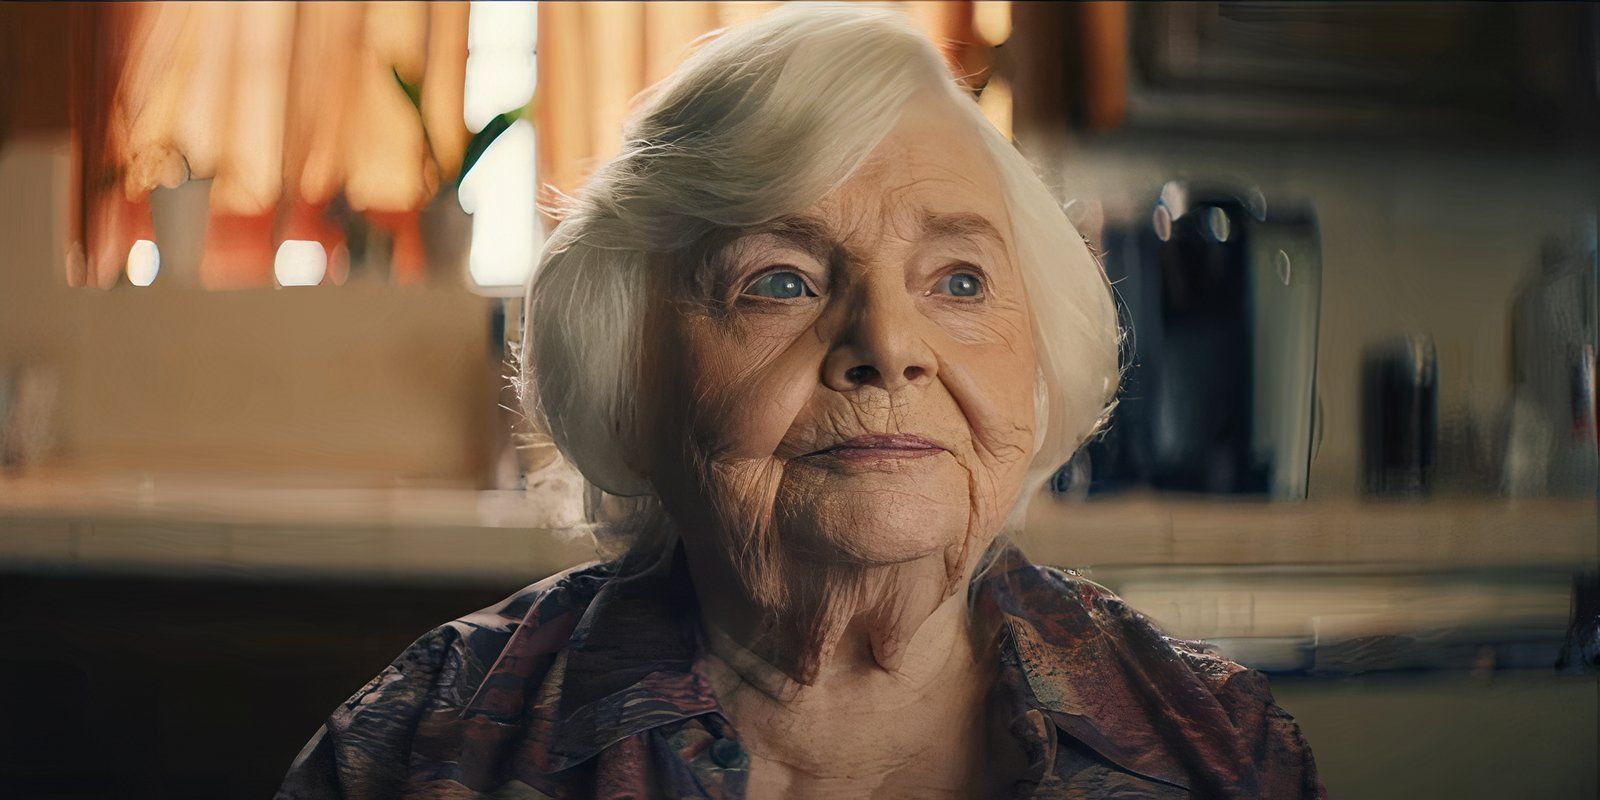 Impossible images for an action film led by a 94-year-old star